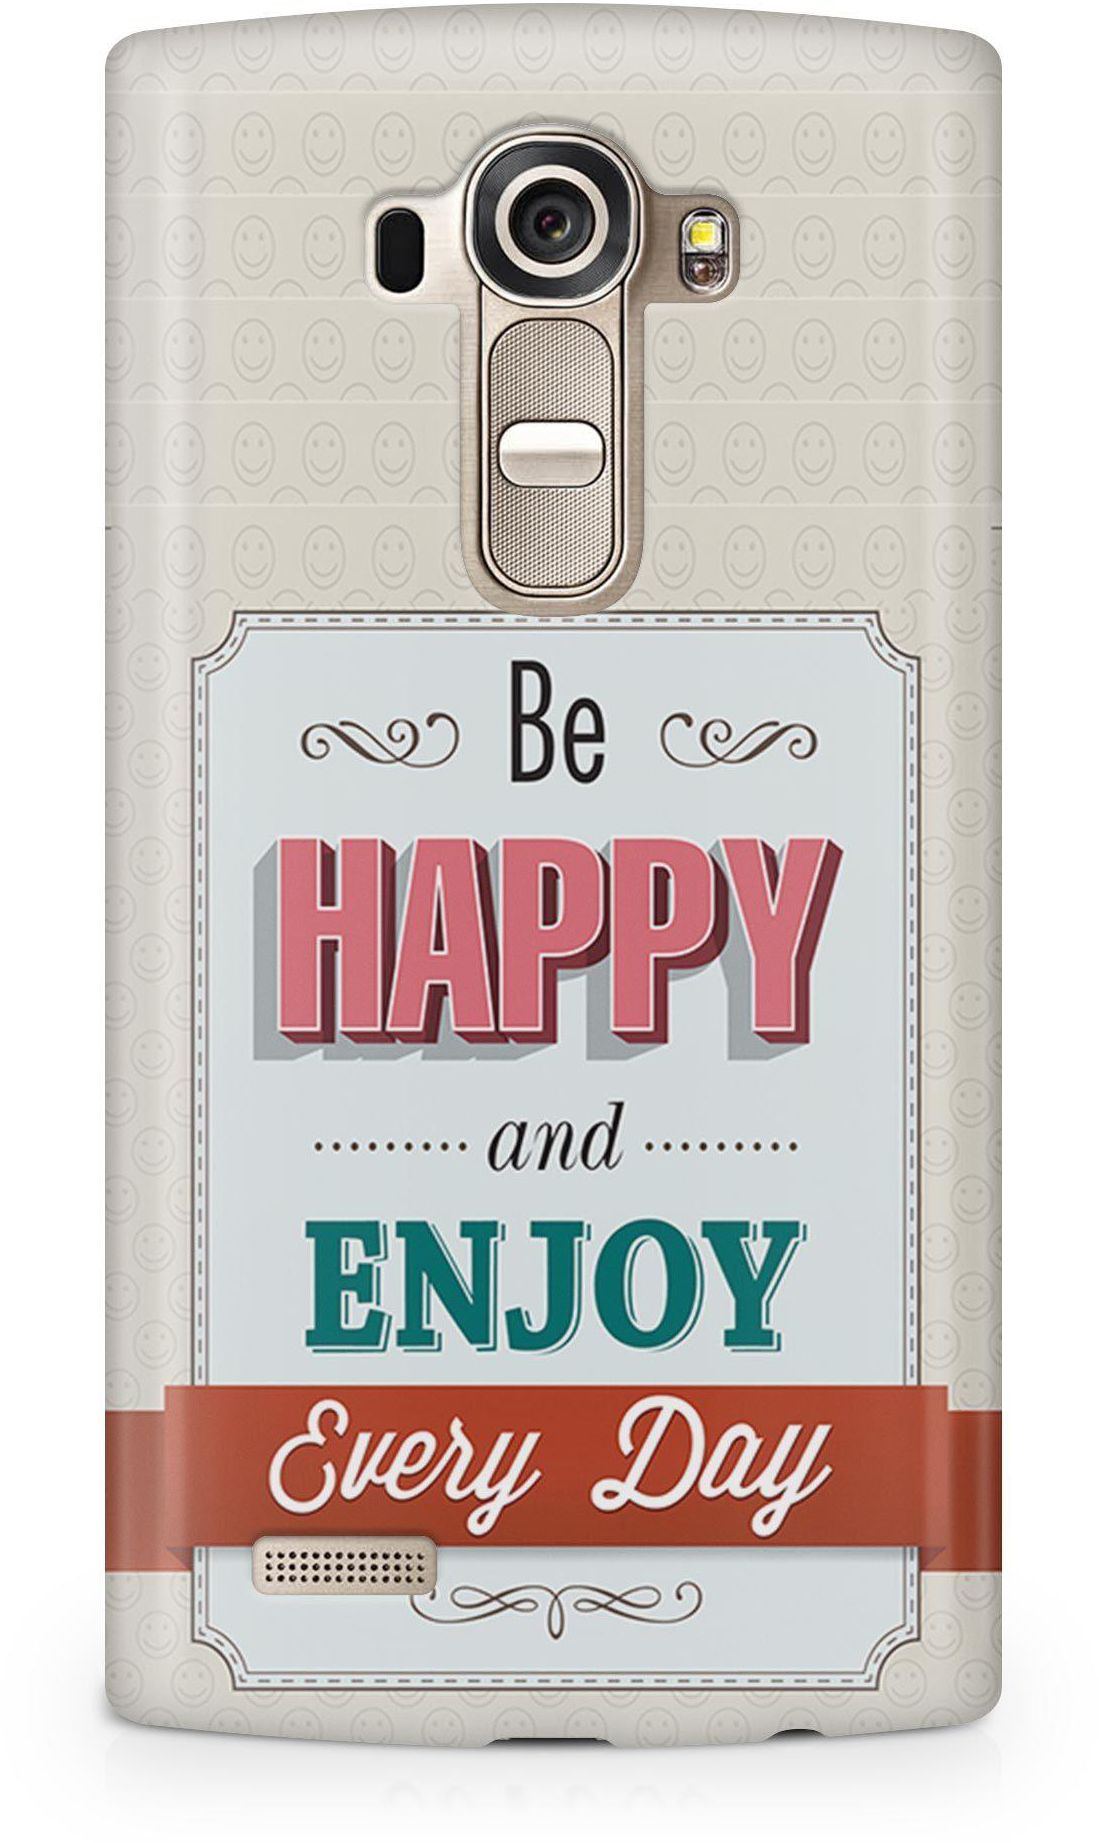 Be Happy and Enjoy Every Day Phone Case Cover 3D for all models for LG G4